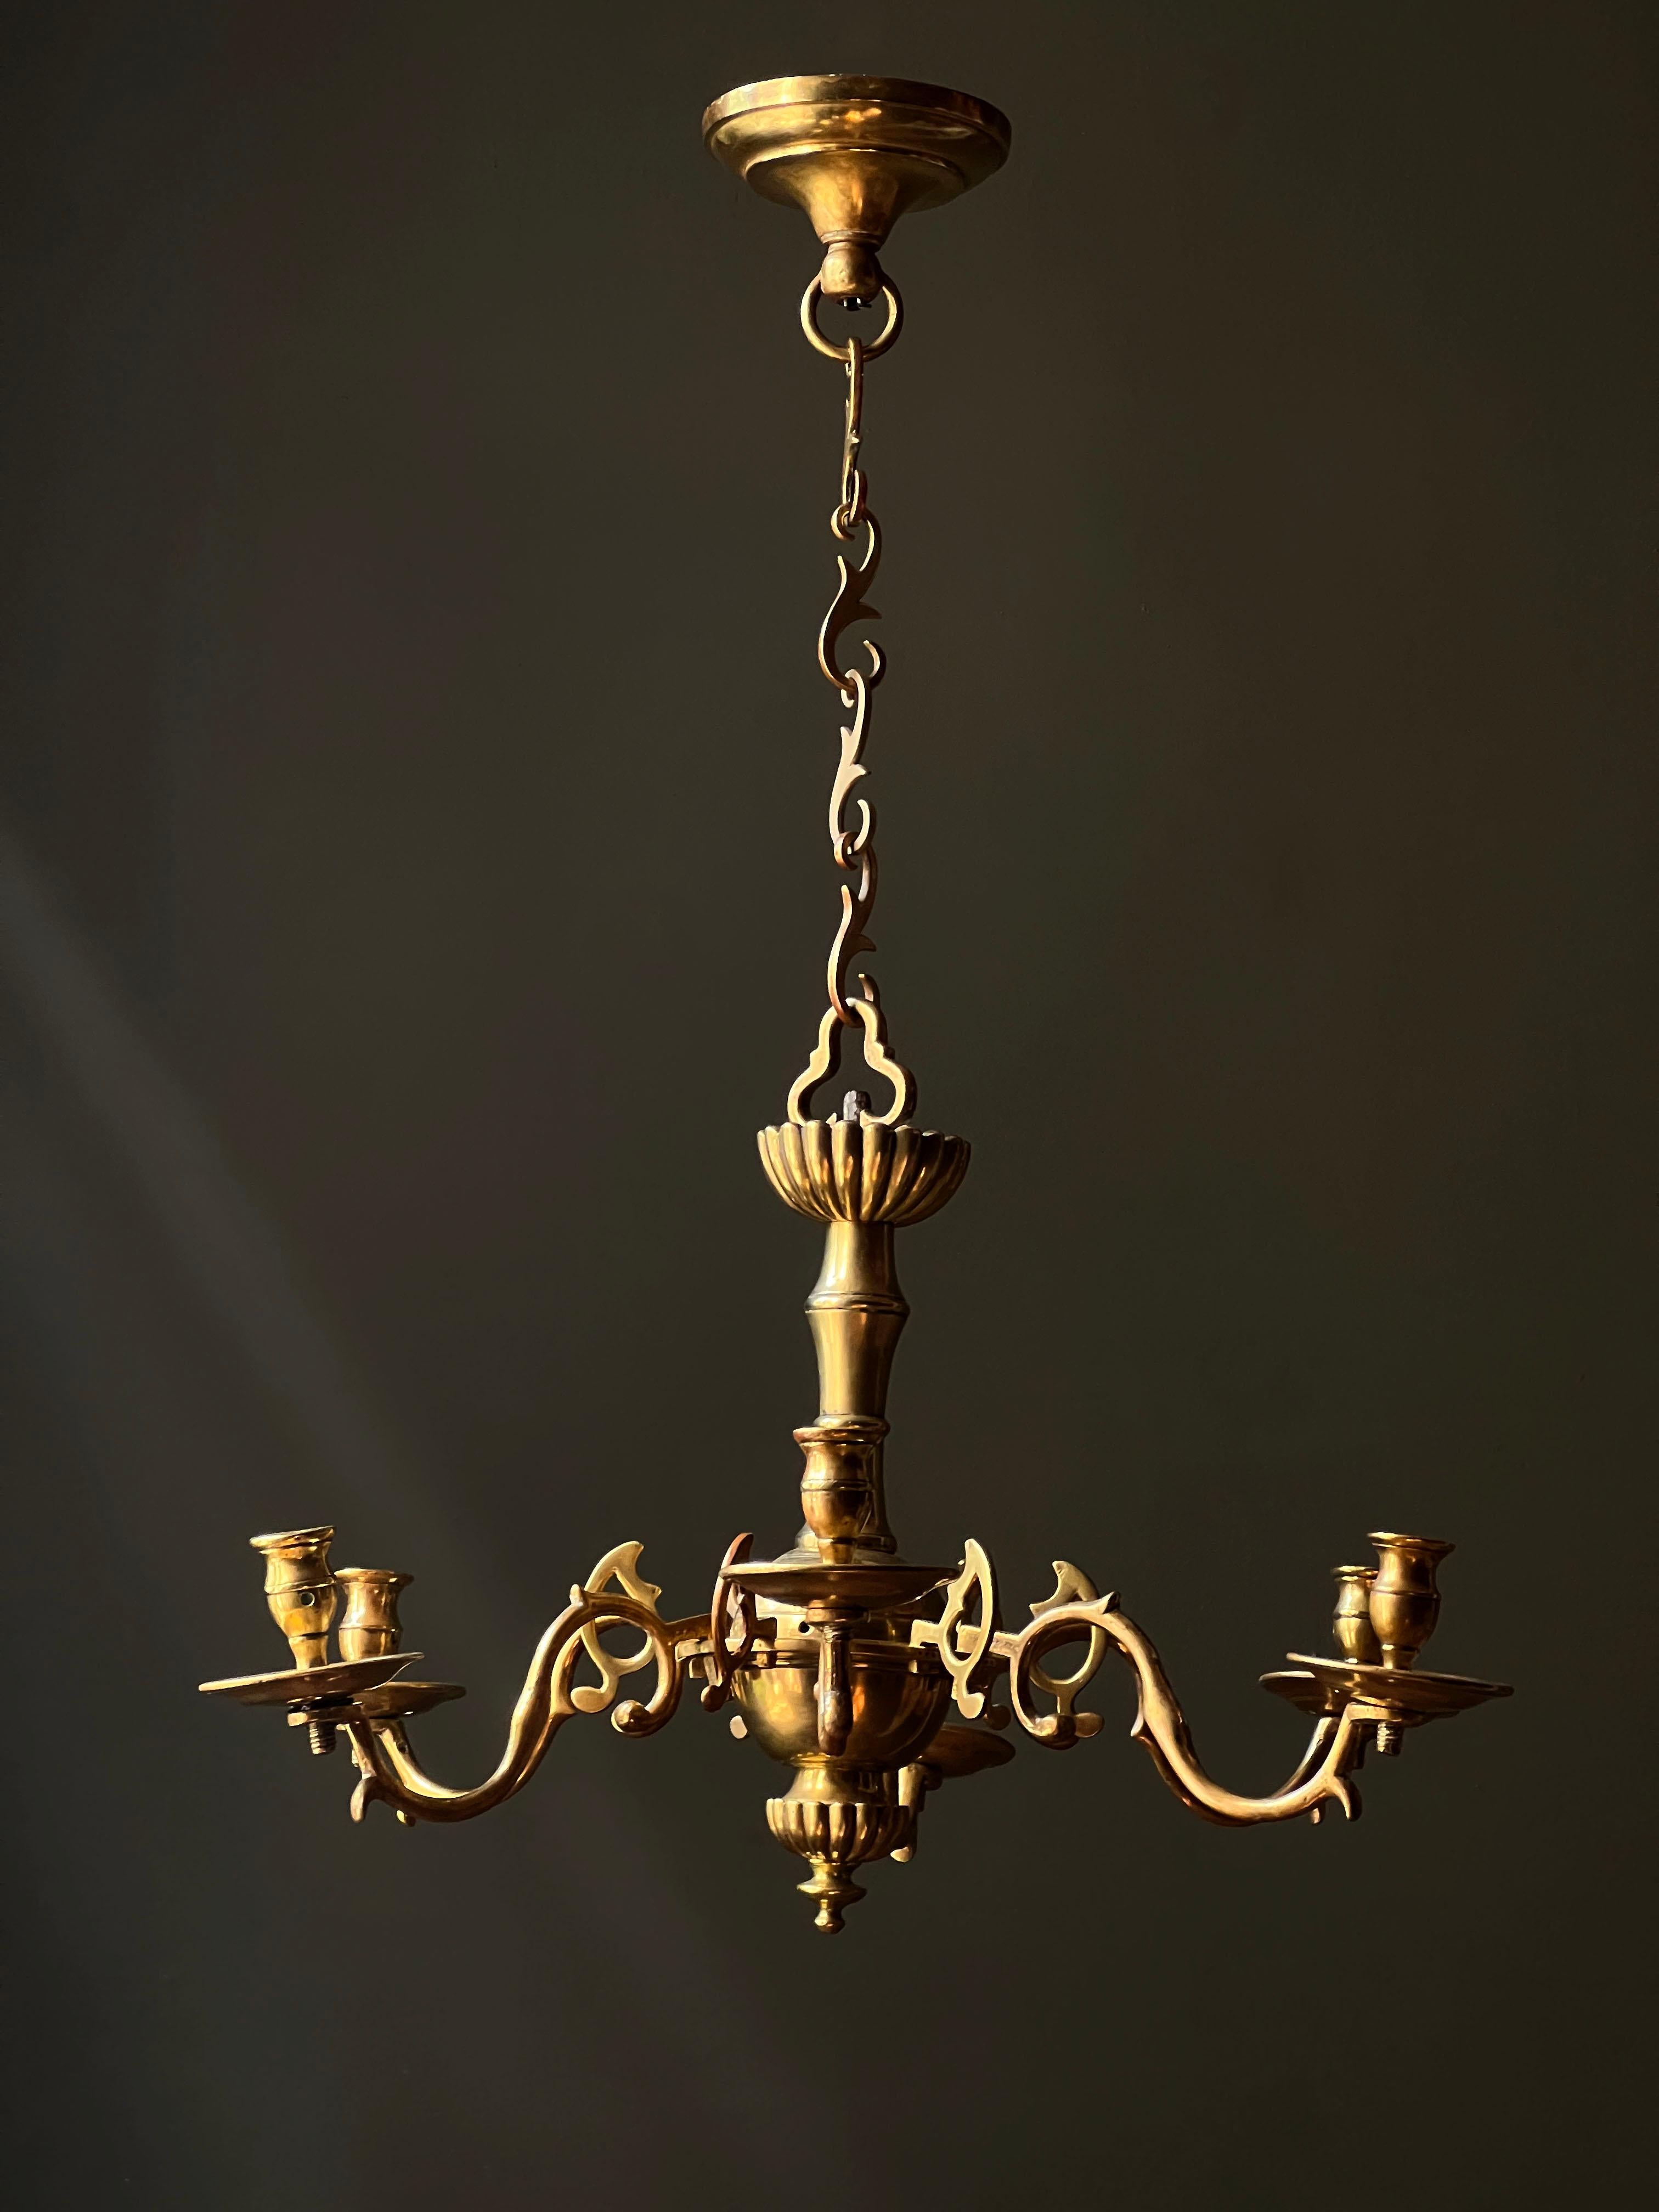 An extraordinary period 18th century brass chandelier of rare form.  Delicate leaf links suspended from the original ceiling mount support a trefoil hook and the body of the light from which extend six branch arms and bobeches with alternating